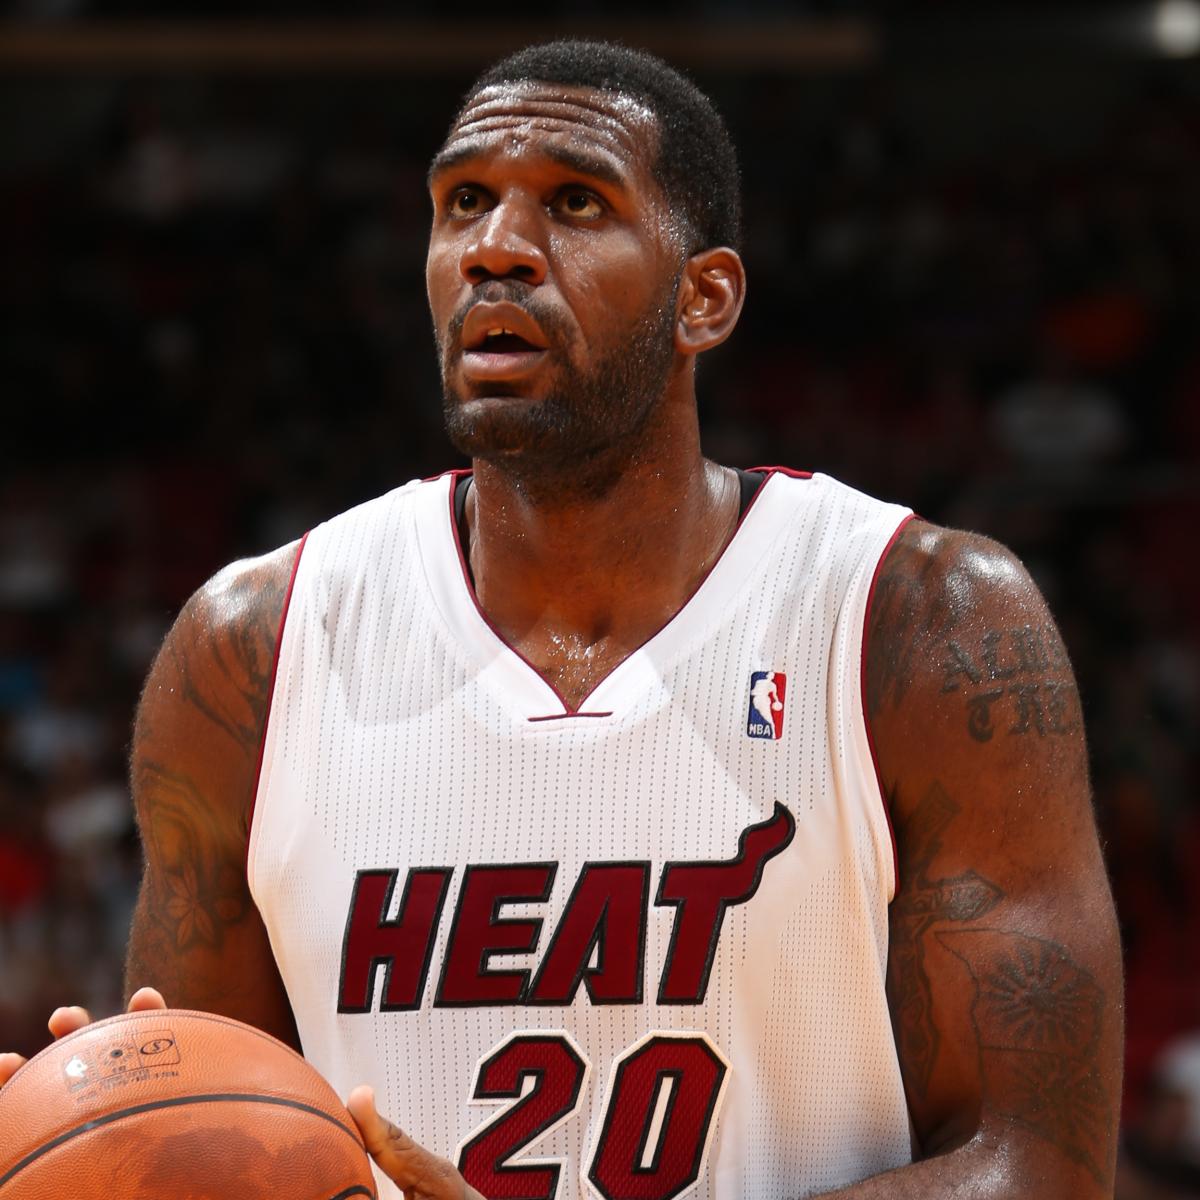 Greg Oden waits for lucky break that may not come - NBC Sports